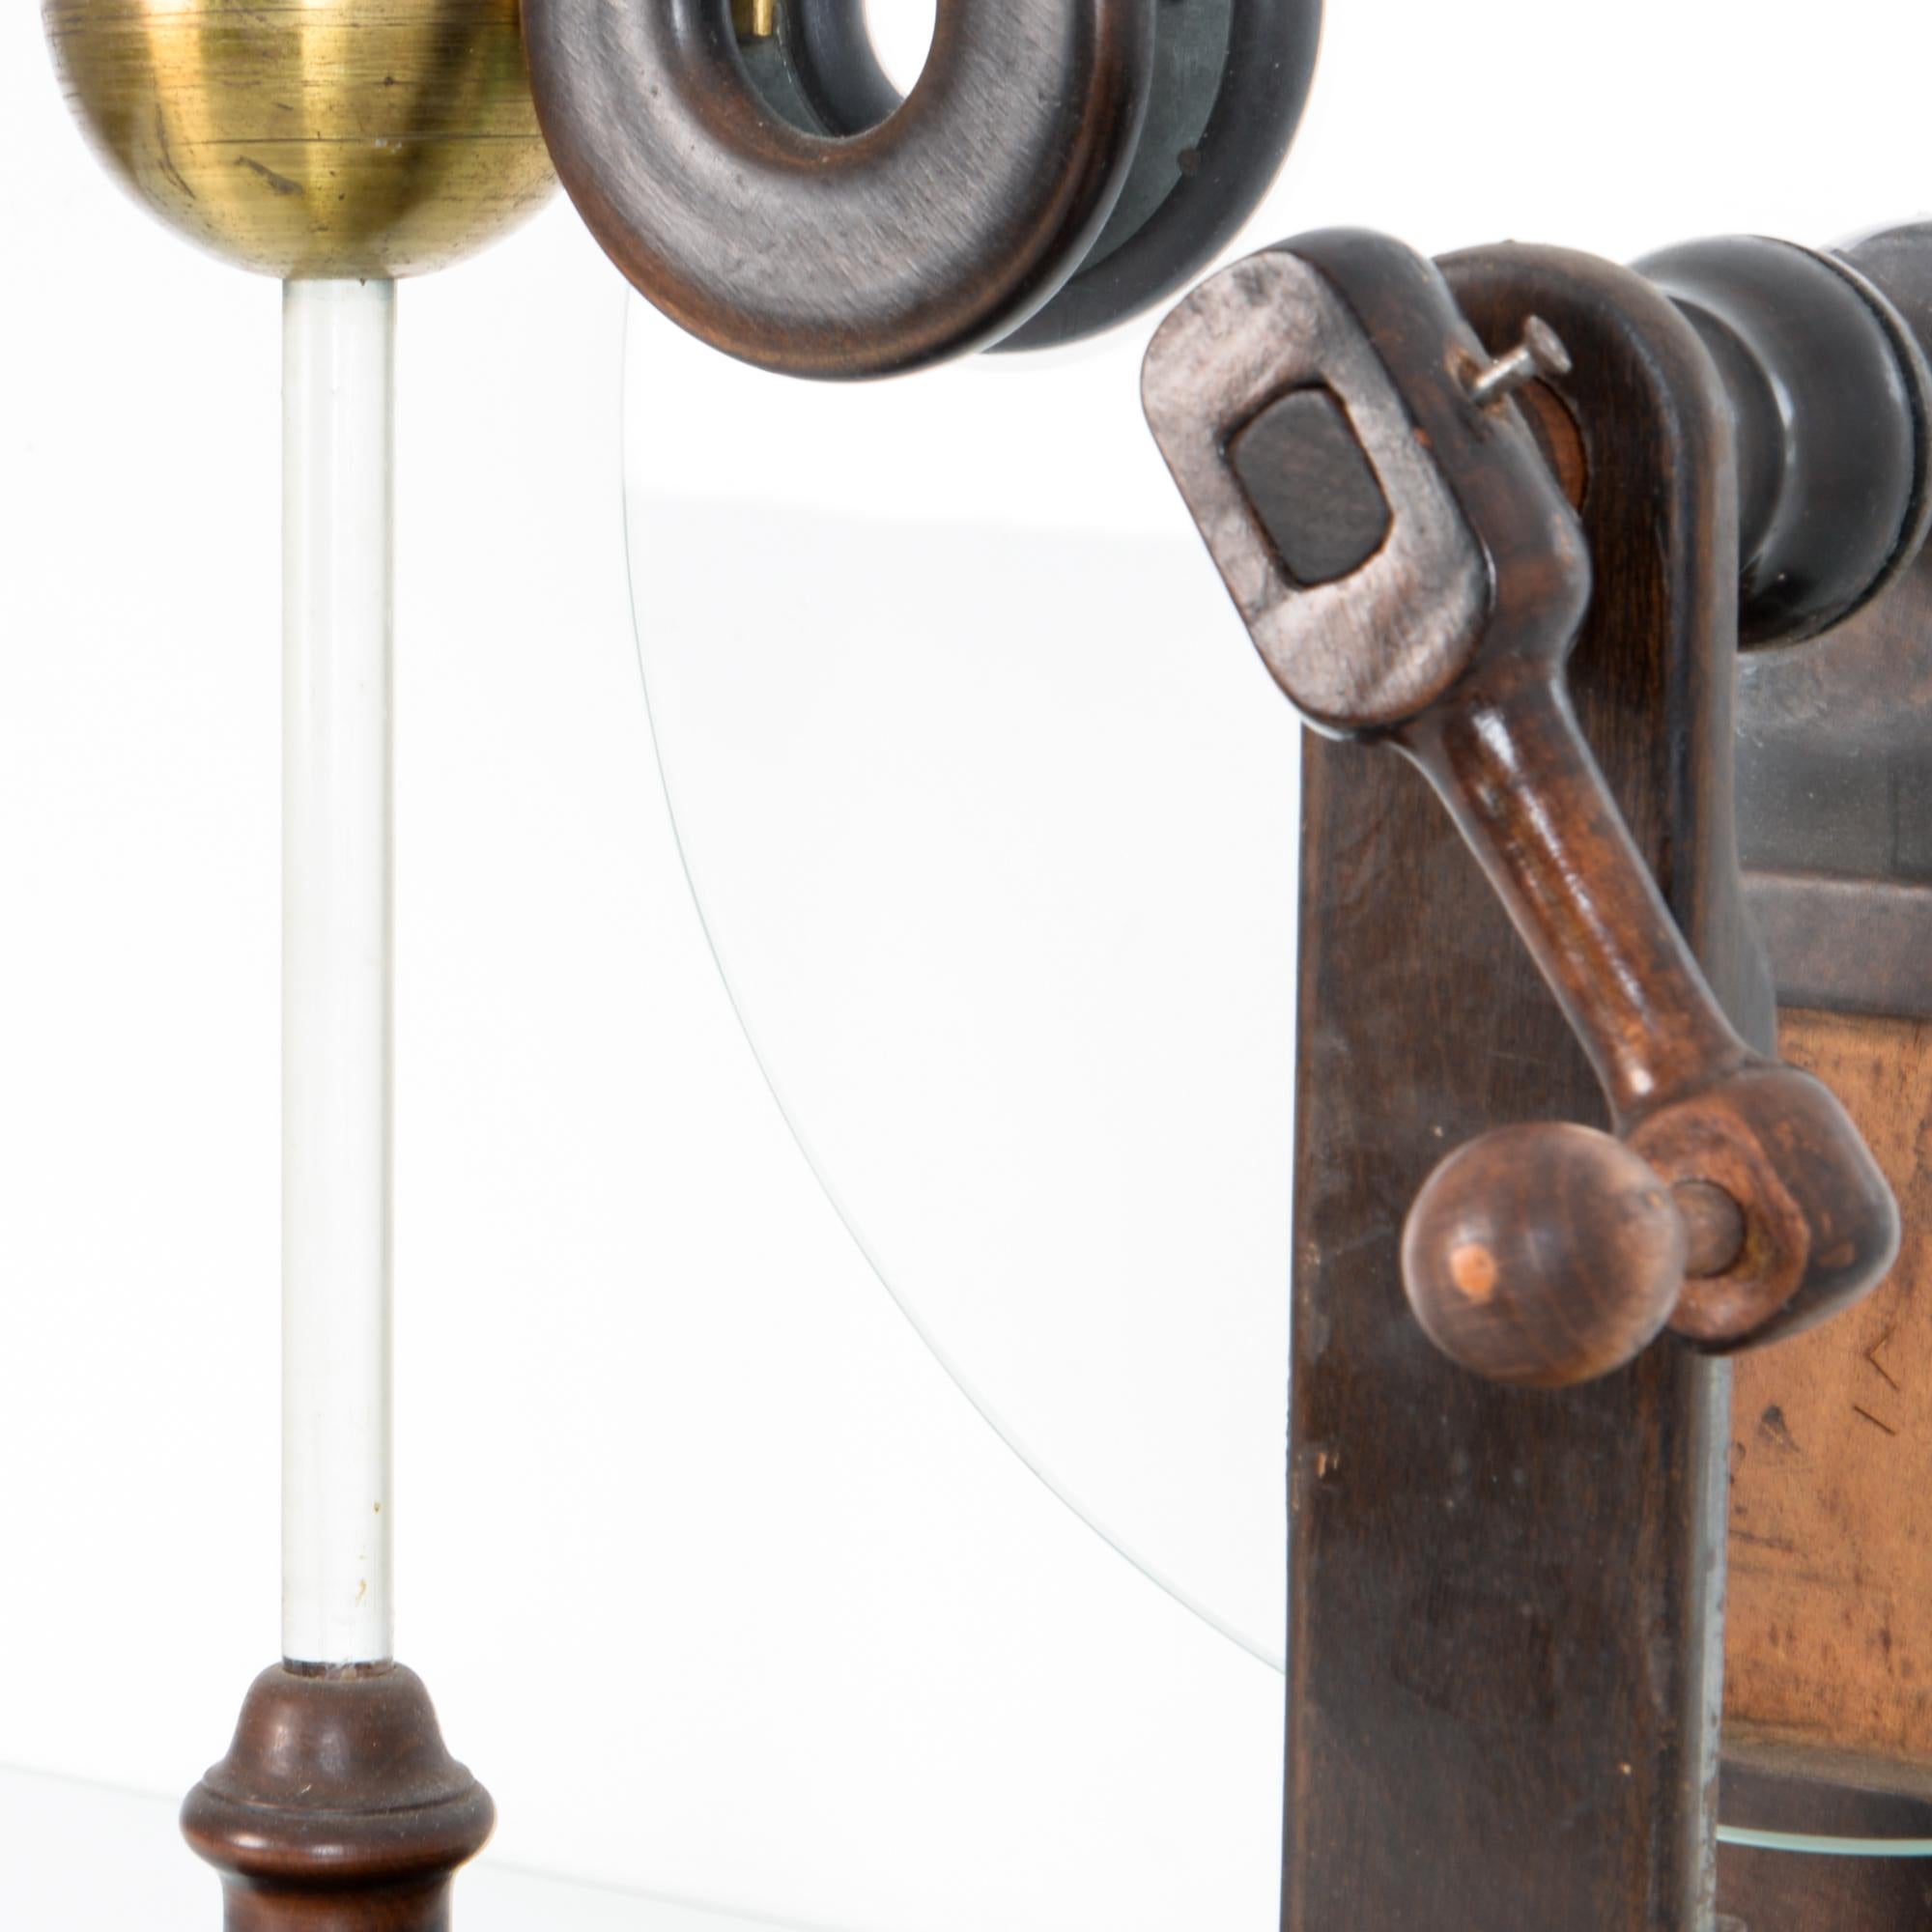 A tabletop wood, brass, and glass apparatus, this didactic instrument was used to demonstrate the production of static electricity. A beautiful design object, shows the attention to detail taken in constructing scientific instruments, in typical